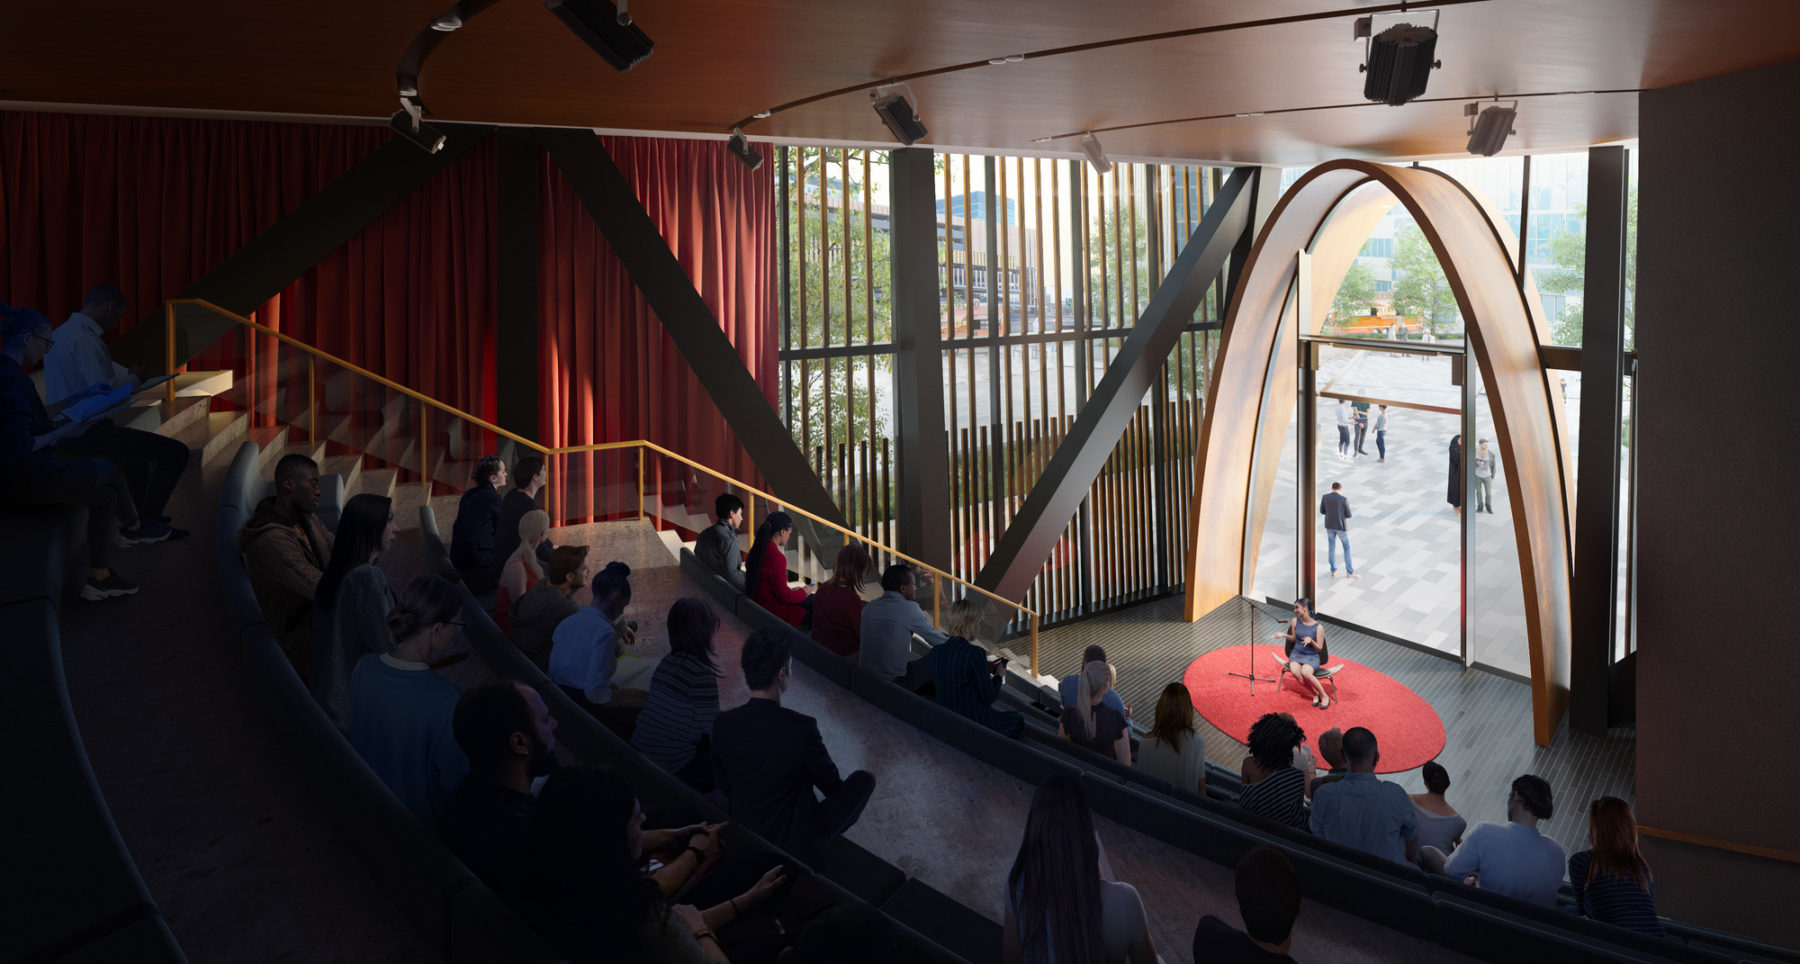 Rendering of building interior. People sit in an amphitheater watching a presentation